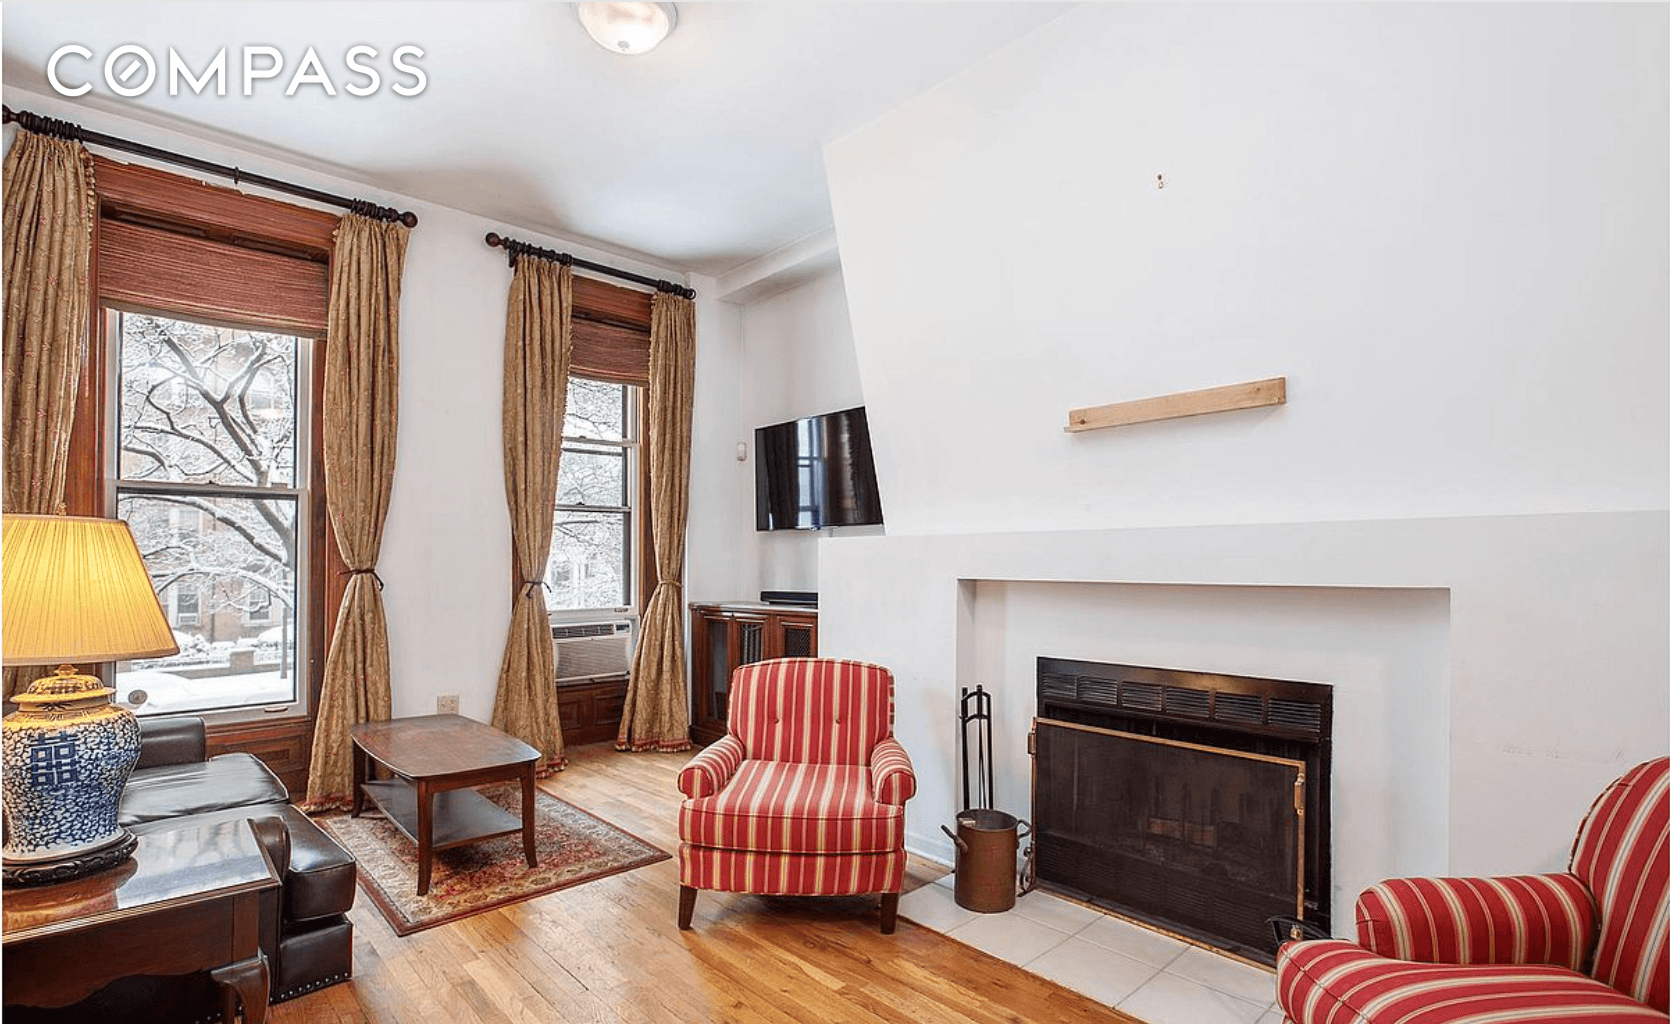 Welcome home to this spacious, 3 bedroom 2 bathroom, floor though apartment on the parlor floor of an intimate brownstone condominium on historic Mansion Row in Clinton Hill.